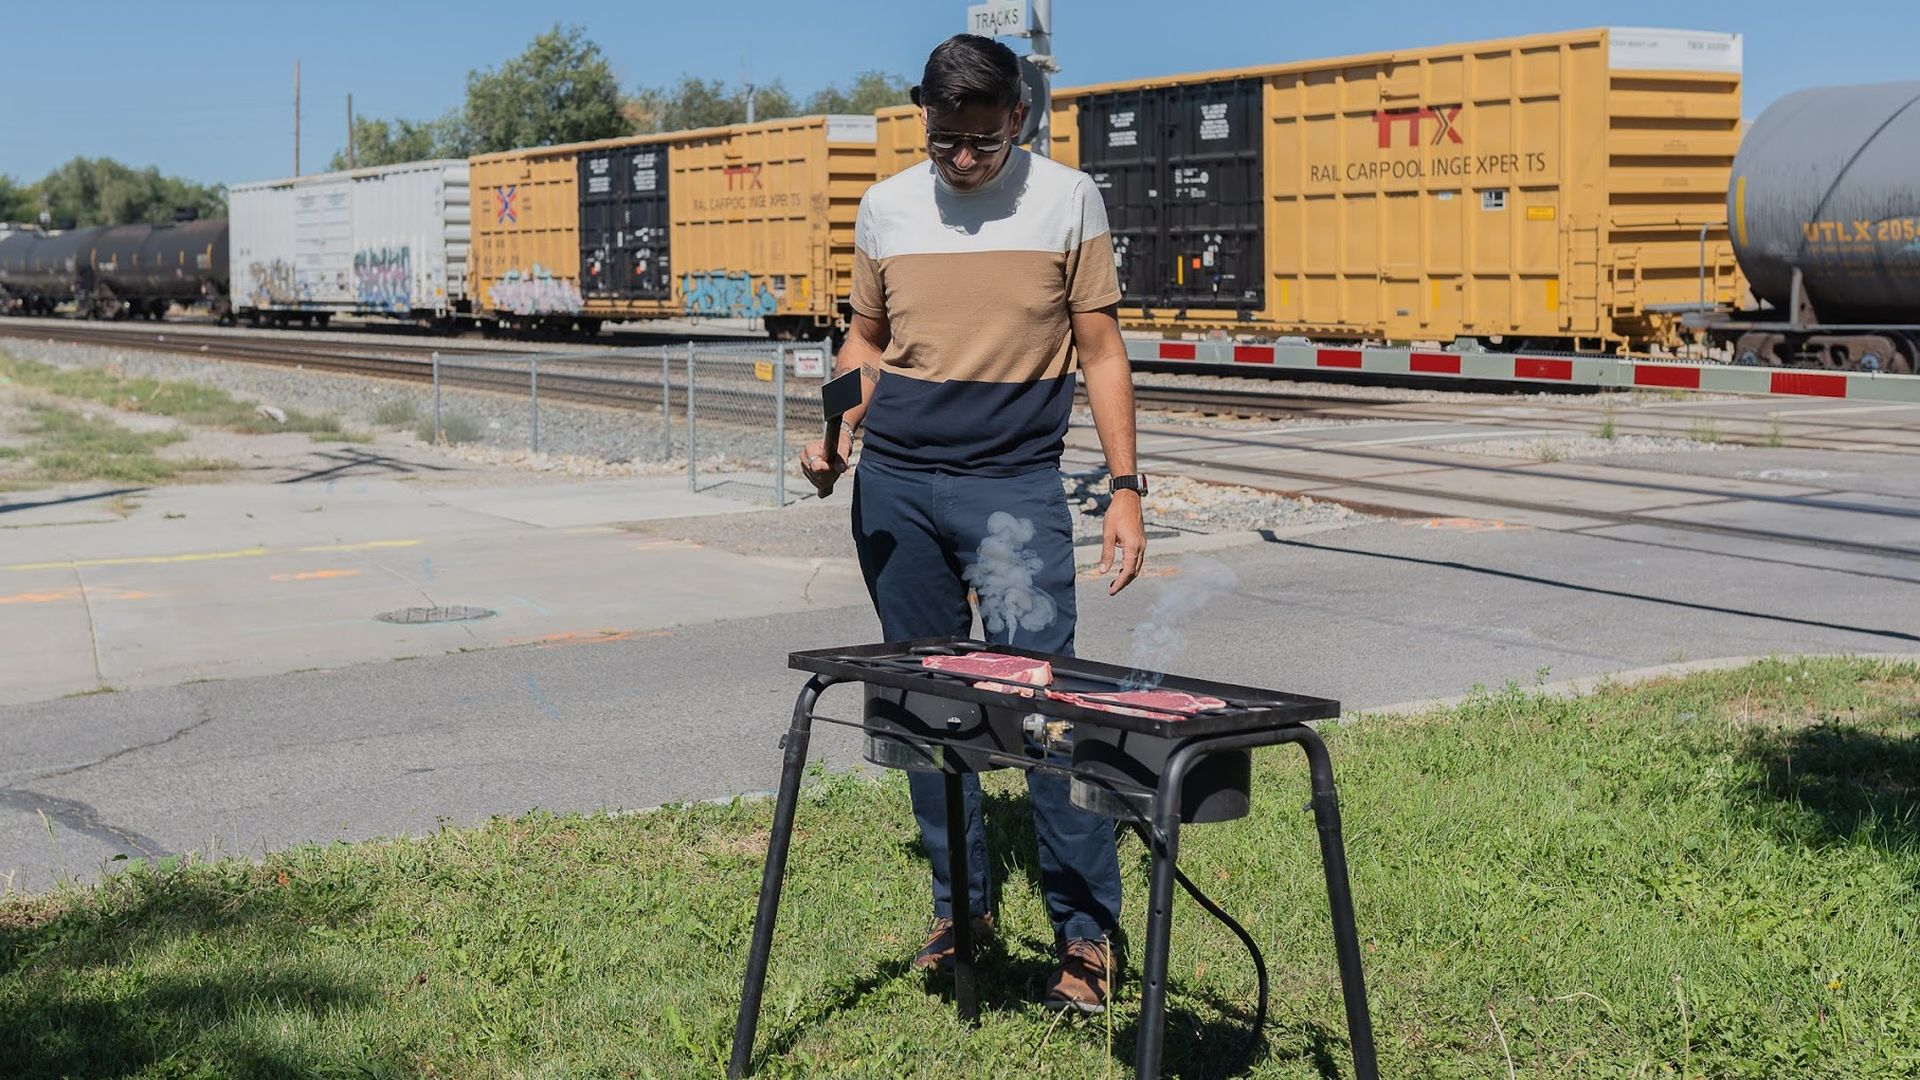 A man grills steaks in front of a stopped train.